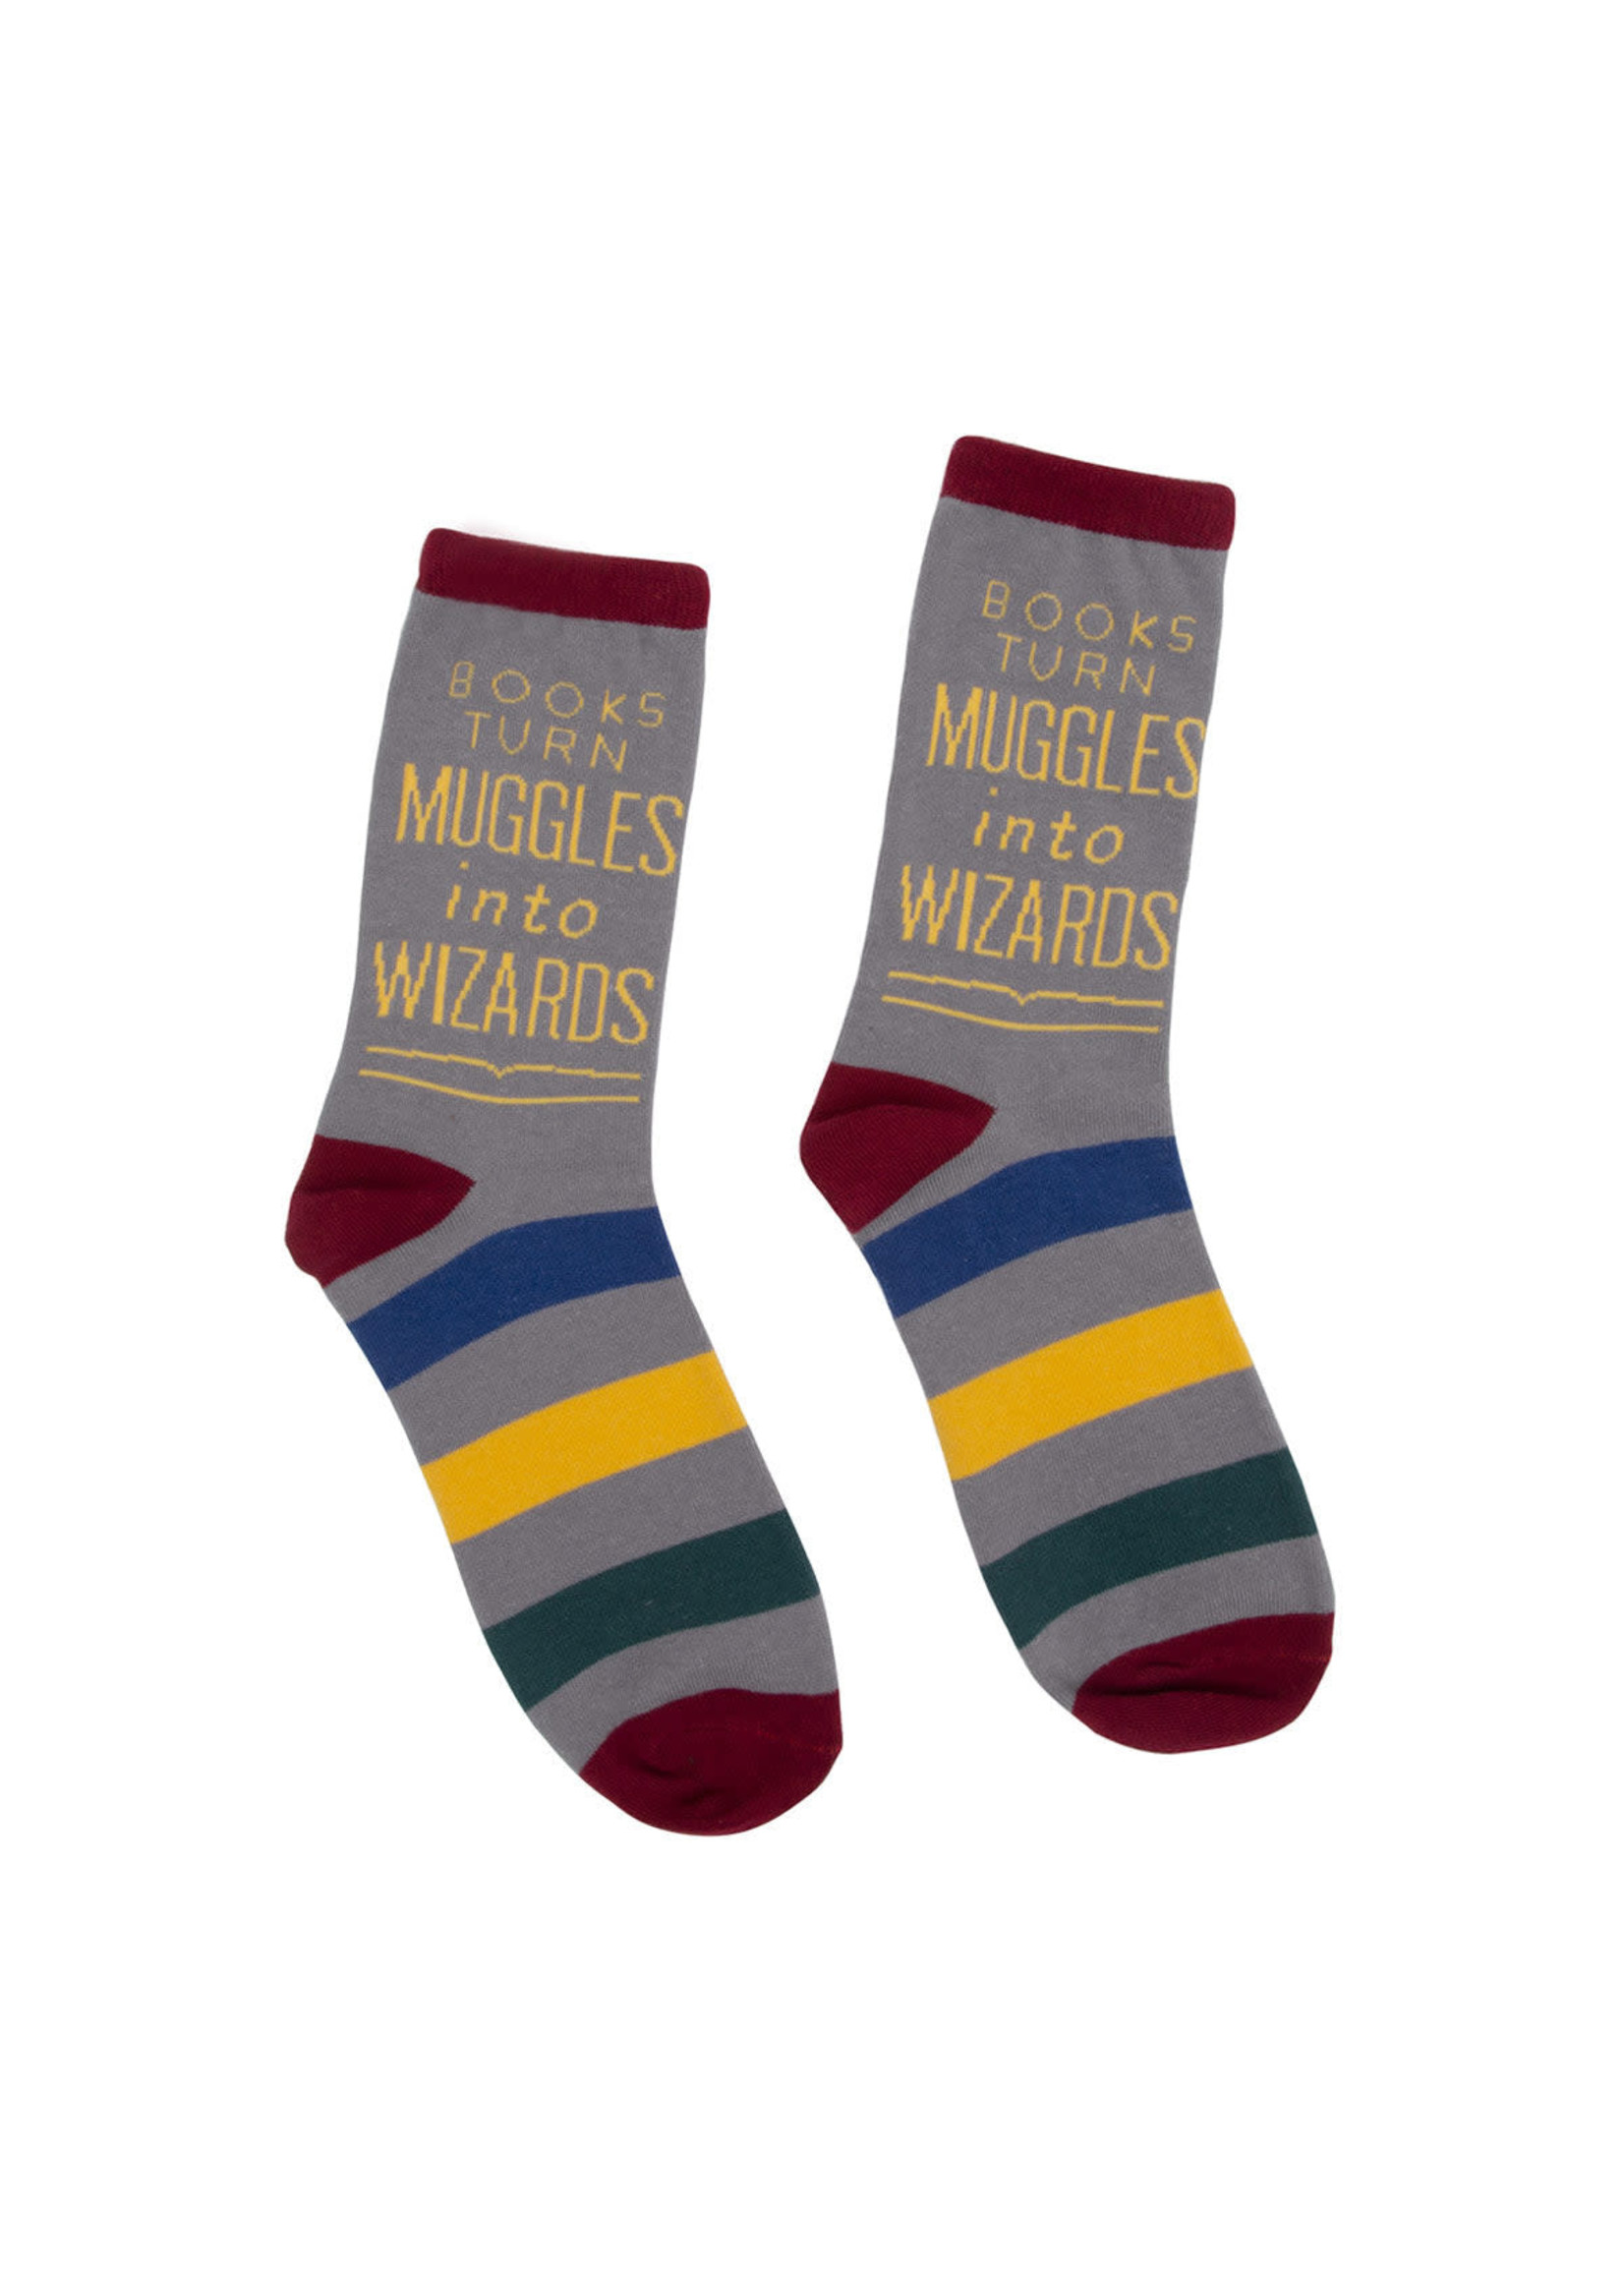 Out of Print Books Turn Muggles Into Wizards Socks